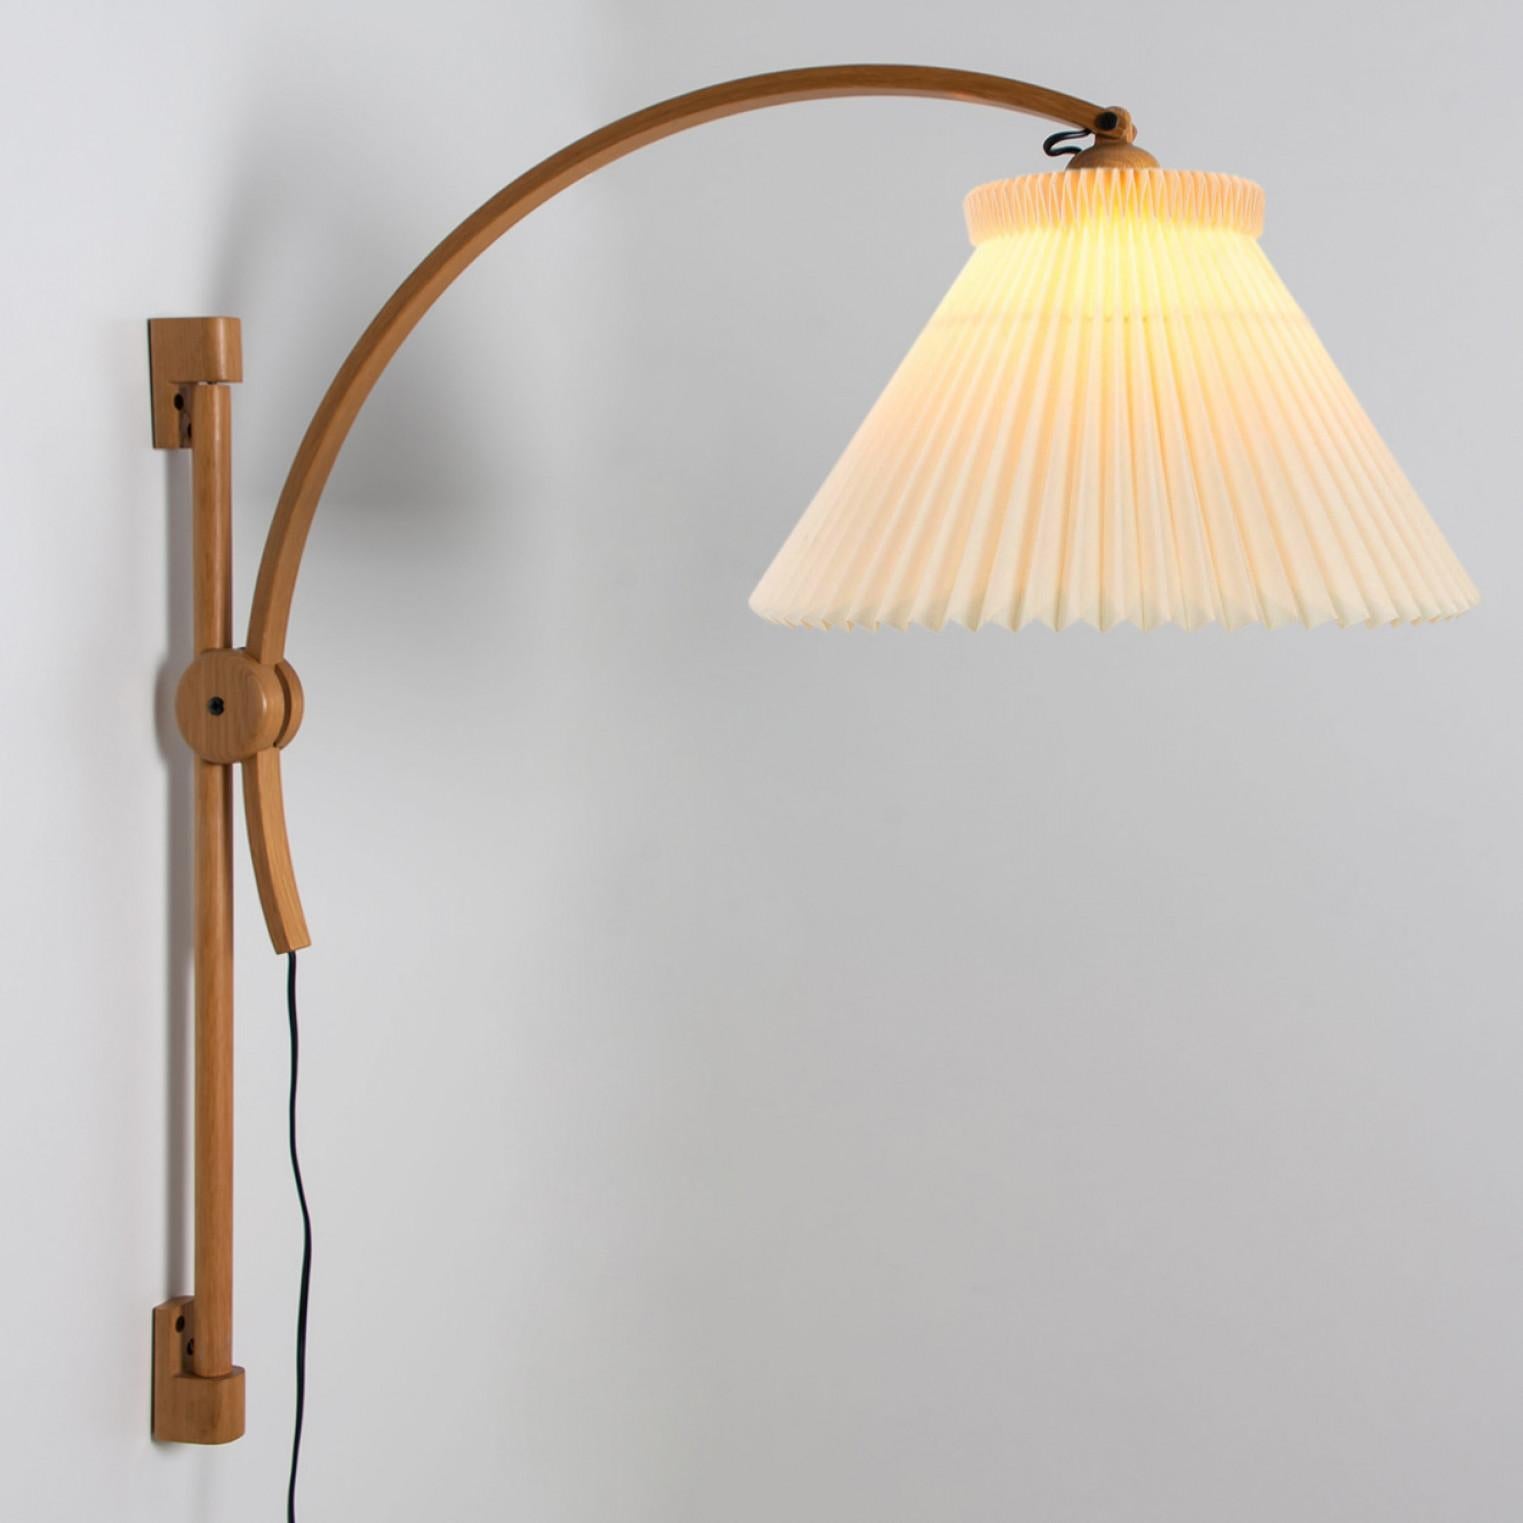 Late 20th Century Pair of Wooden Wall Lights with New Le Klint Shade by Domus Germany, 1970s For Sale